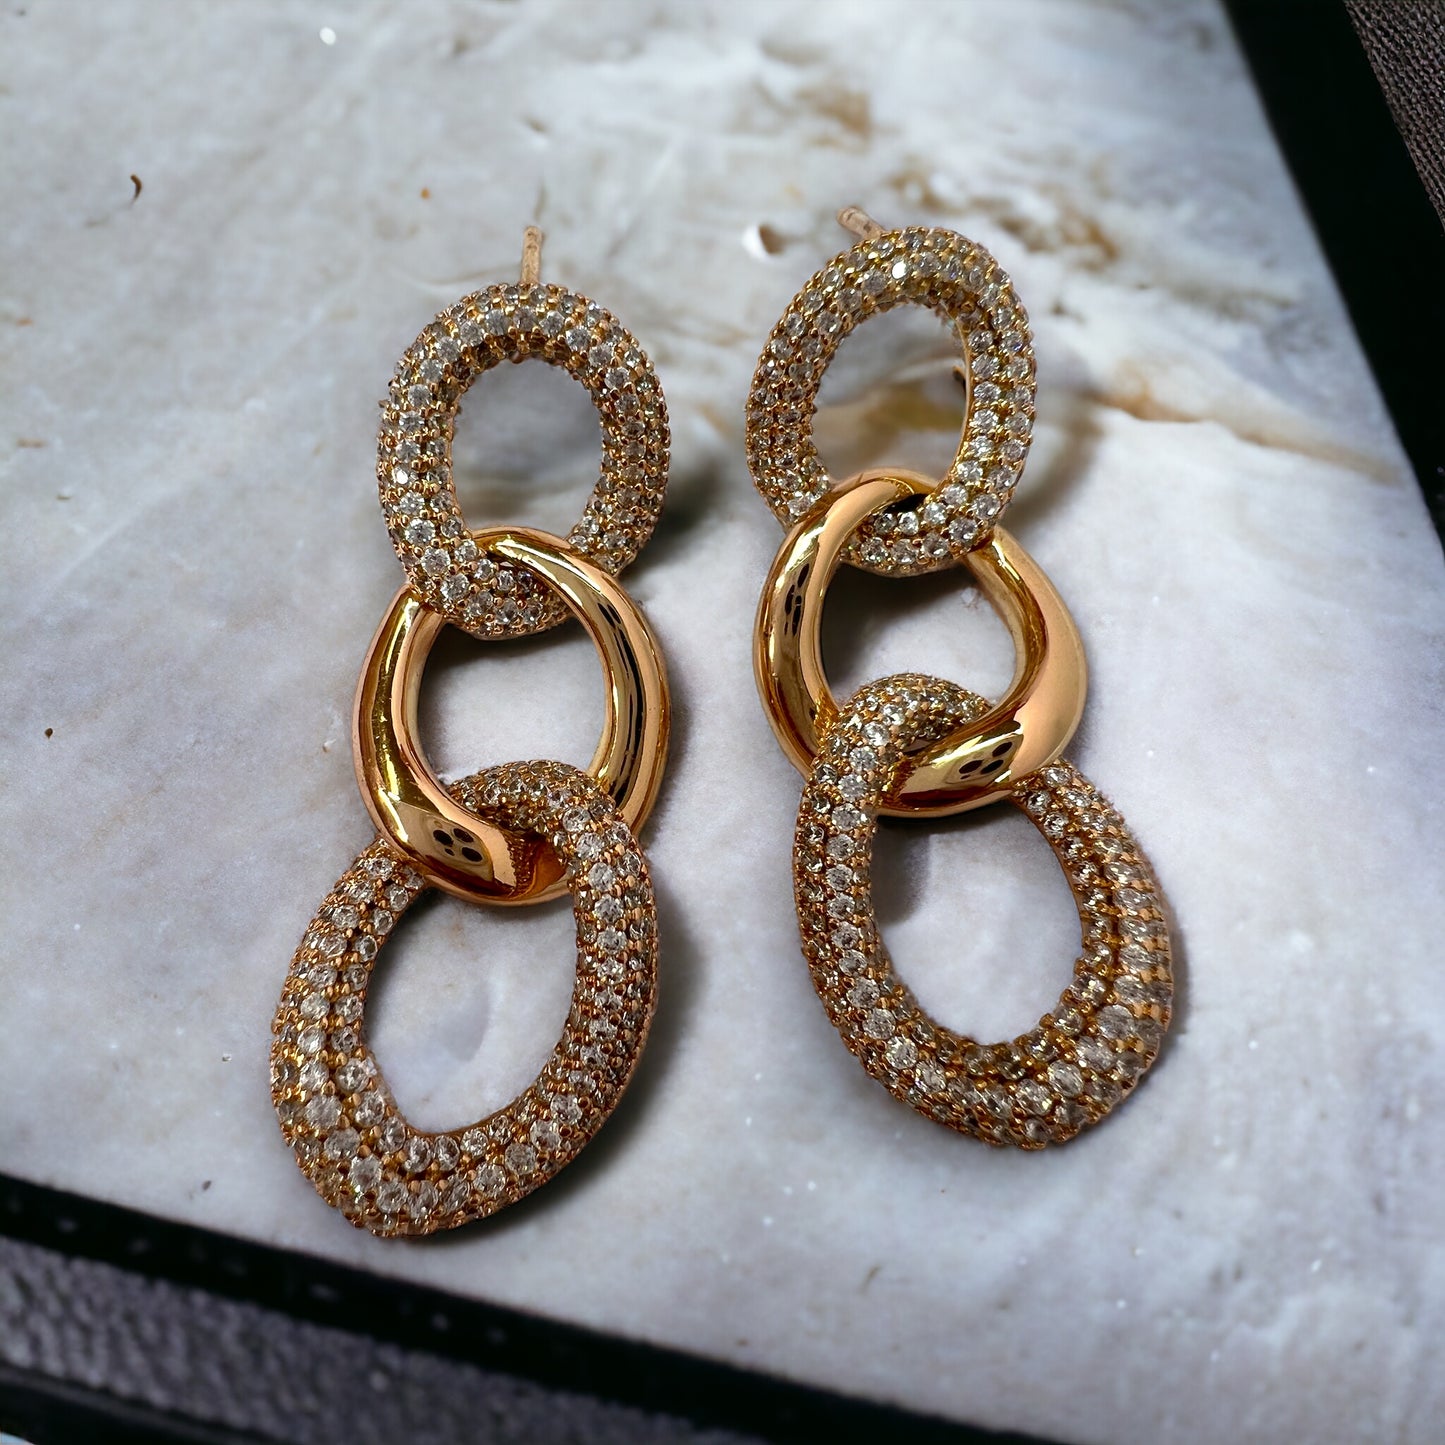 Trendy Chain Style Drop Earrings Gold Plated